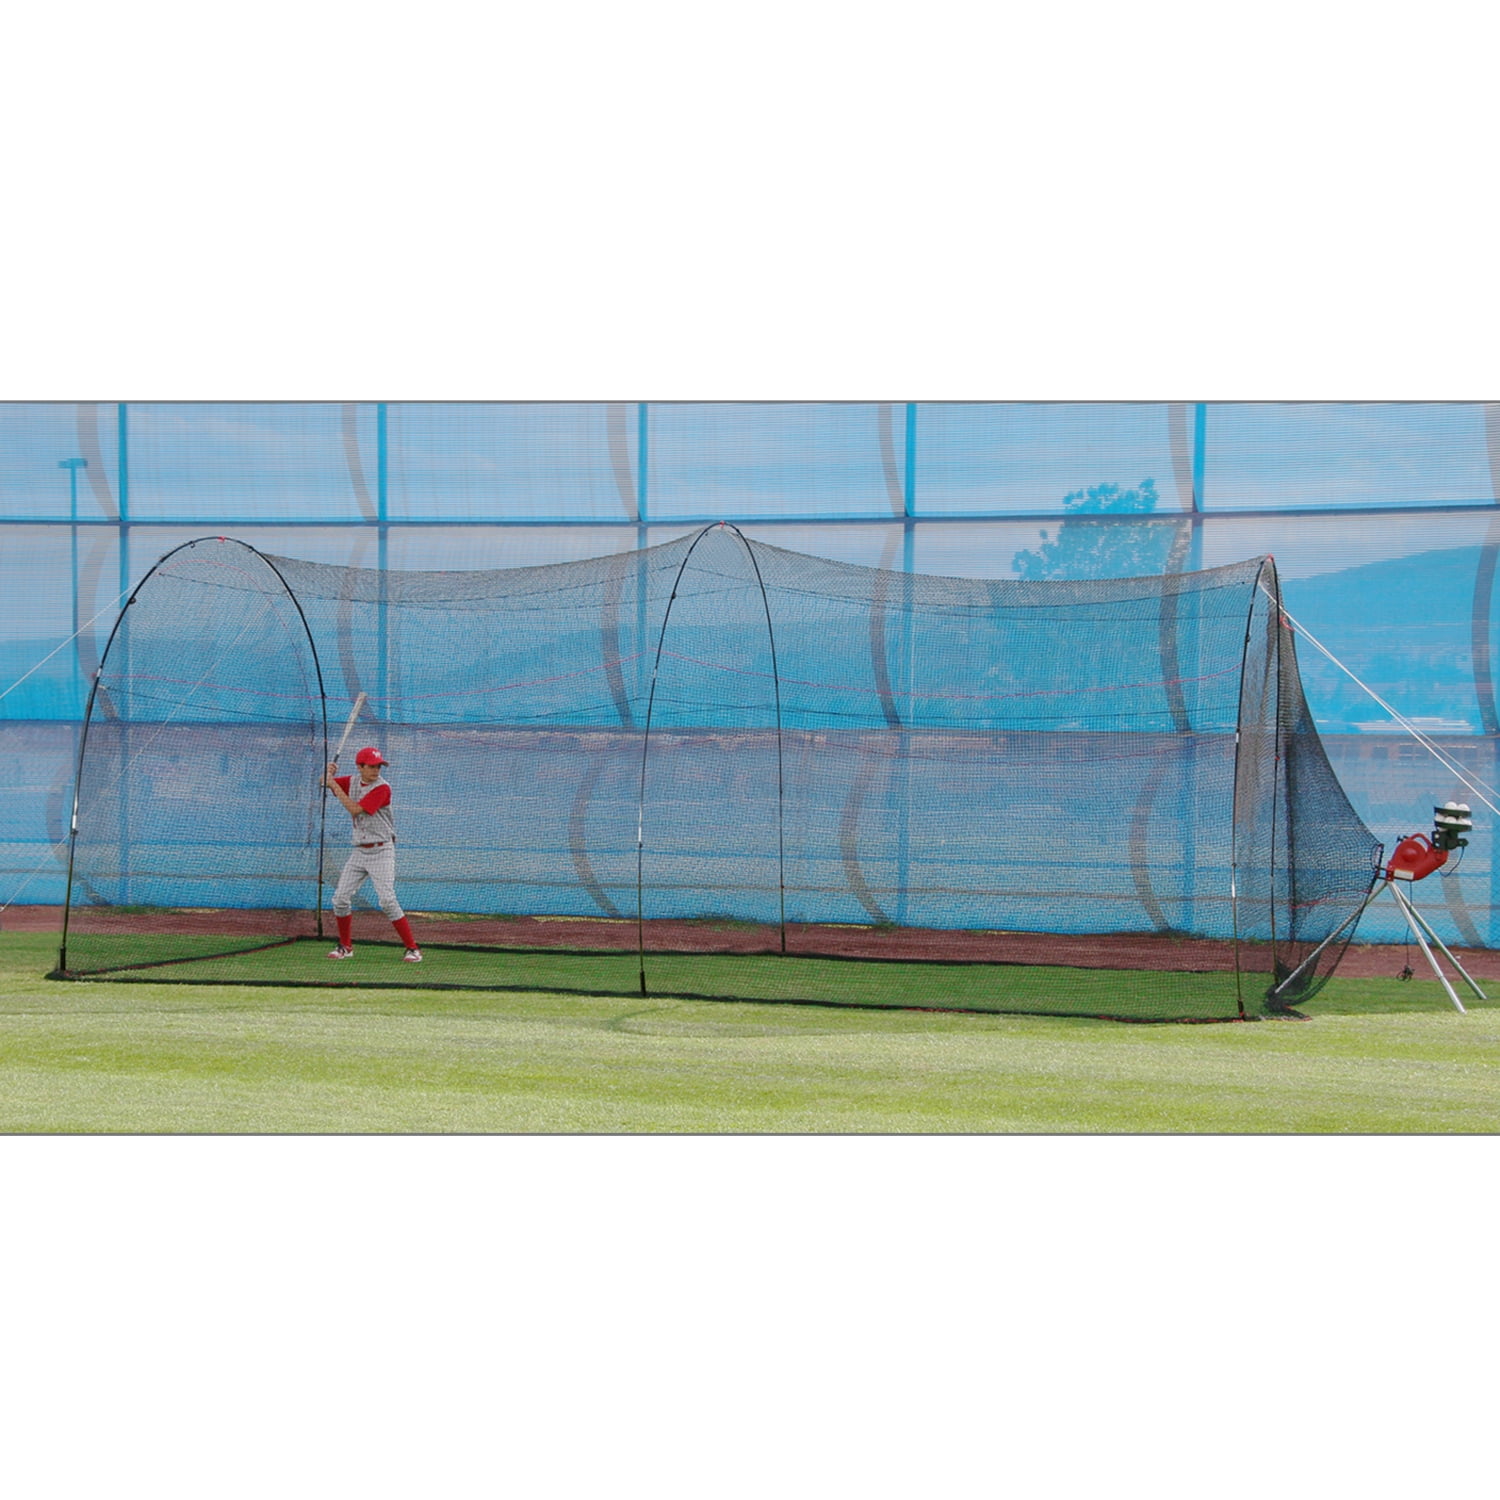 Heater Sports Power Alley Batting Cage - PA199